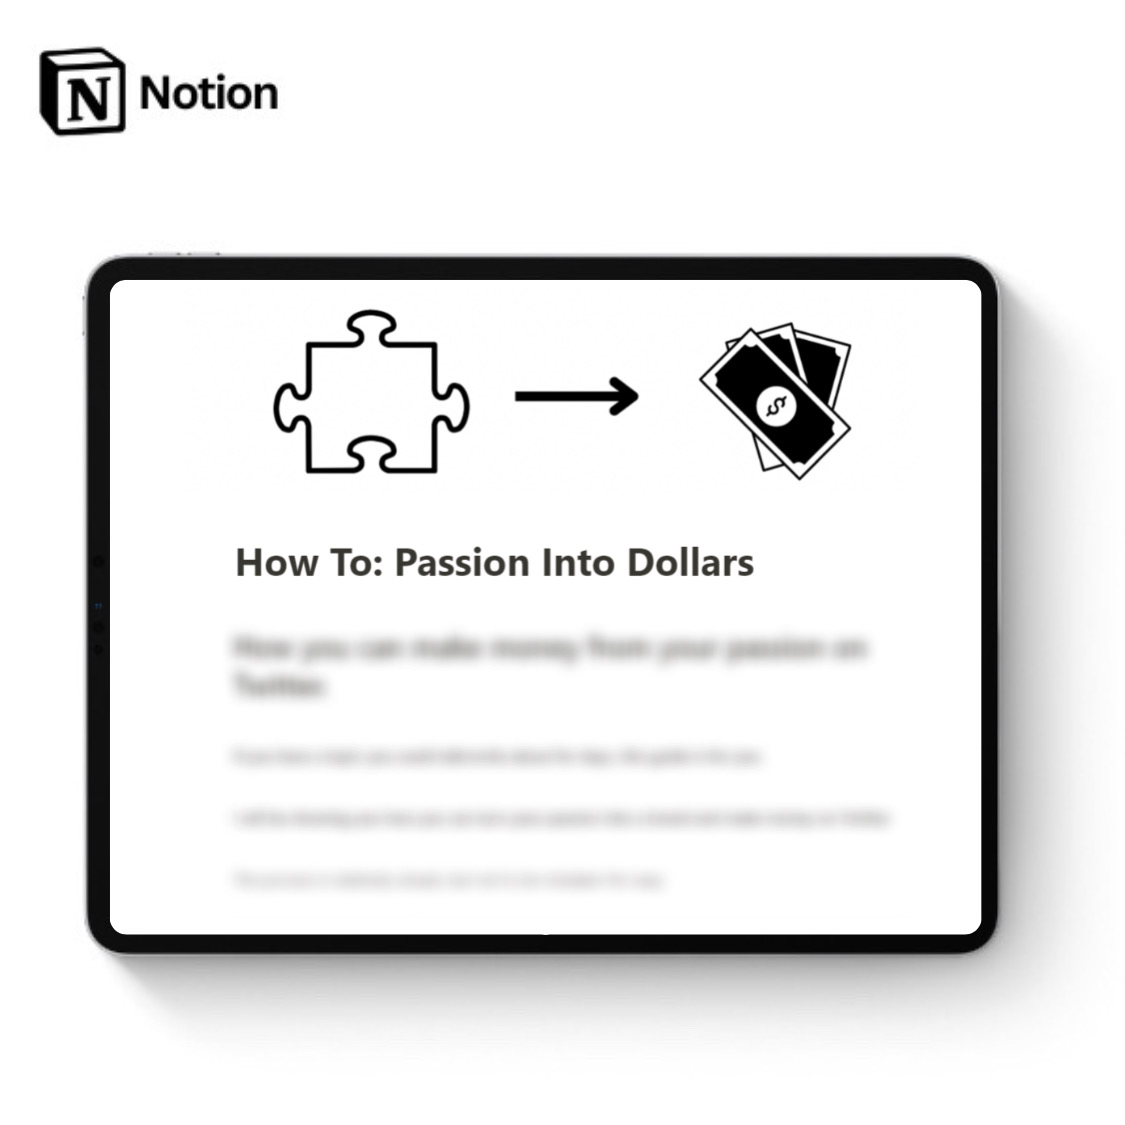 You can make $10,000/mo on Twitter from your passion.

-Any topic
-No expertise
-No budget

I put together a 6-step guide to turn your passion into money in 2023.

And for 48 h, it's FREE

Like, RT + comment 'Passion' and I'll DM it to you

(Must be following)